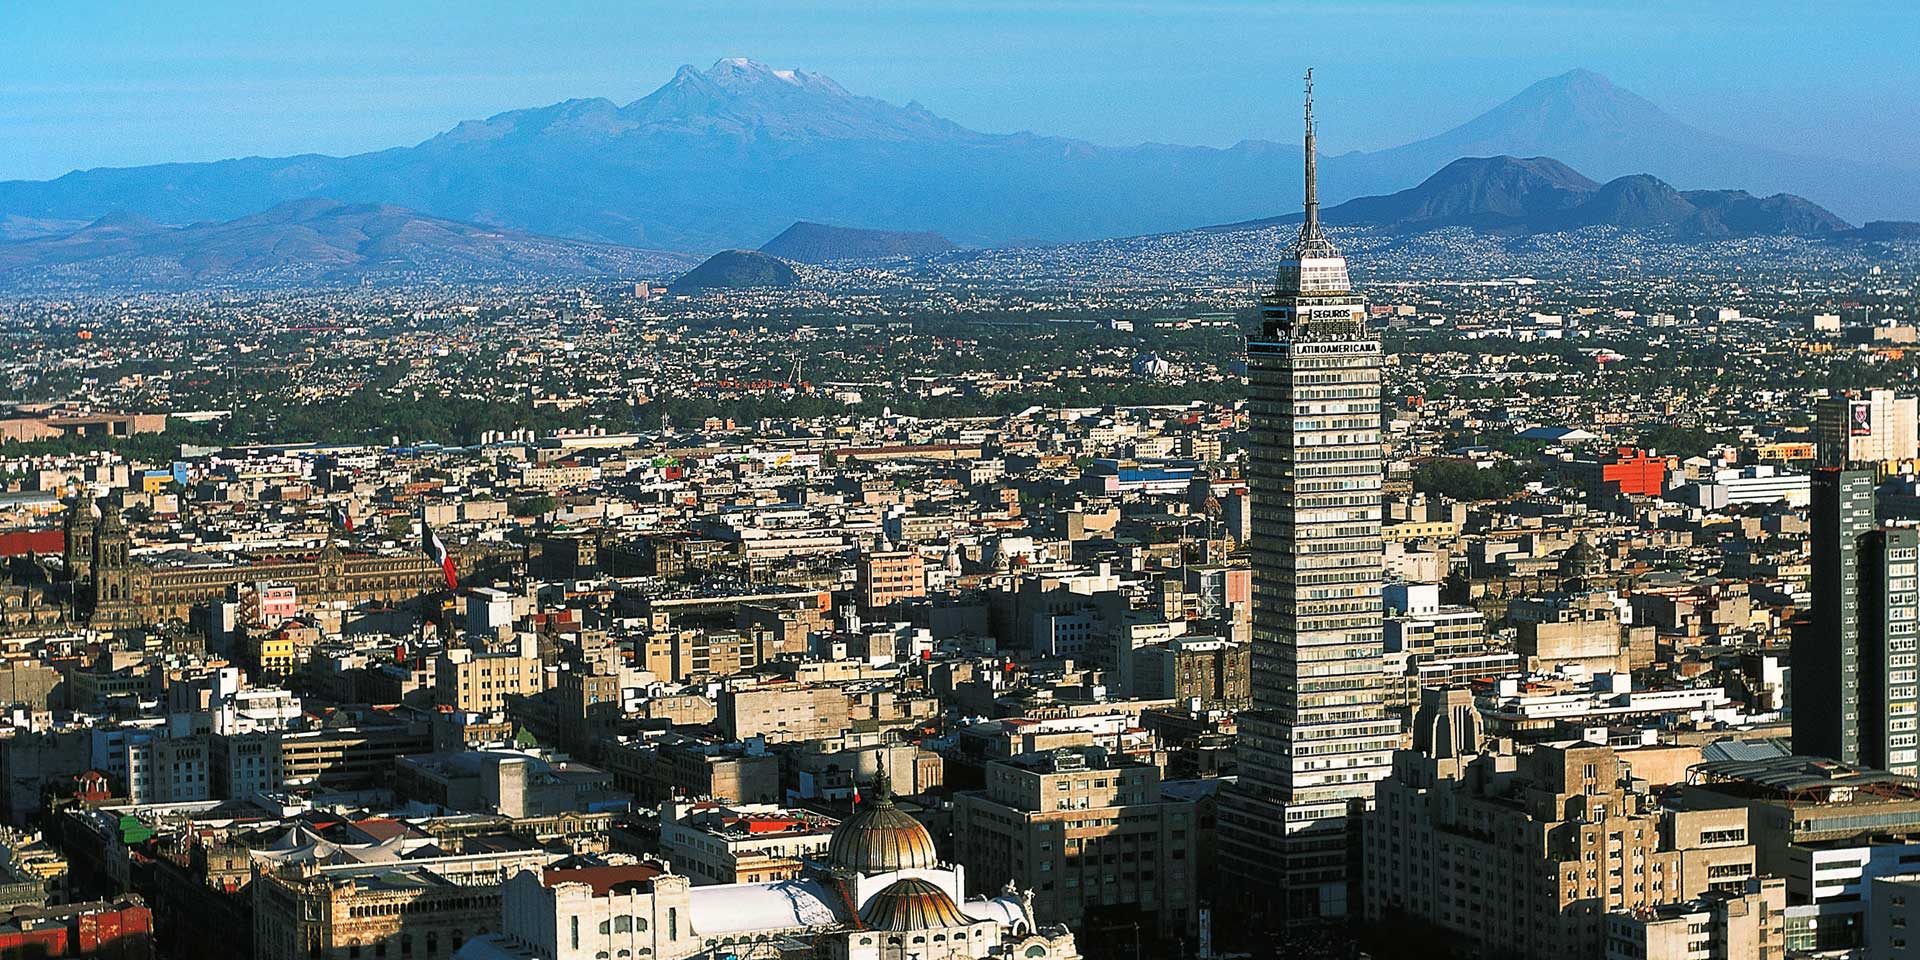 http://www.whitecase.com/sites/whitecase/files/images/locations/MexicoCity_Mexico_Tablet_1920x960.jpg